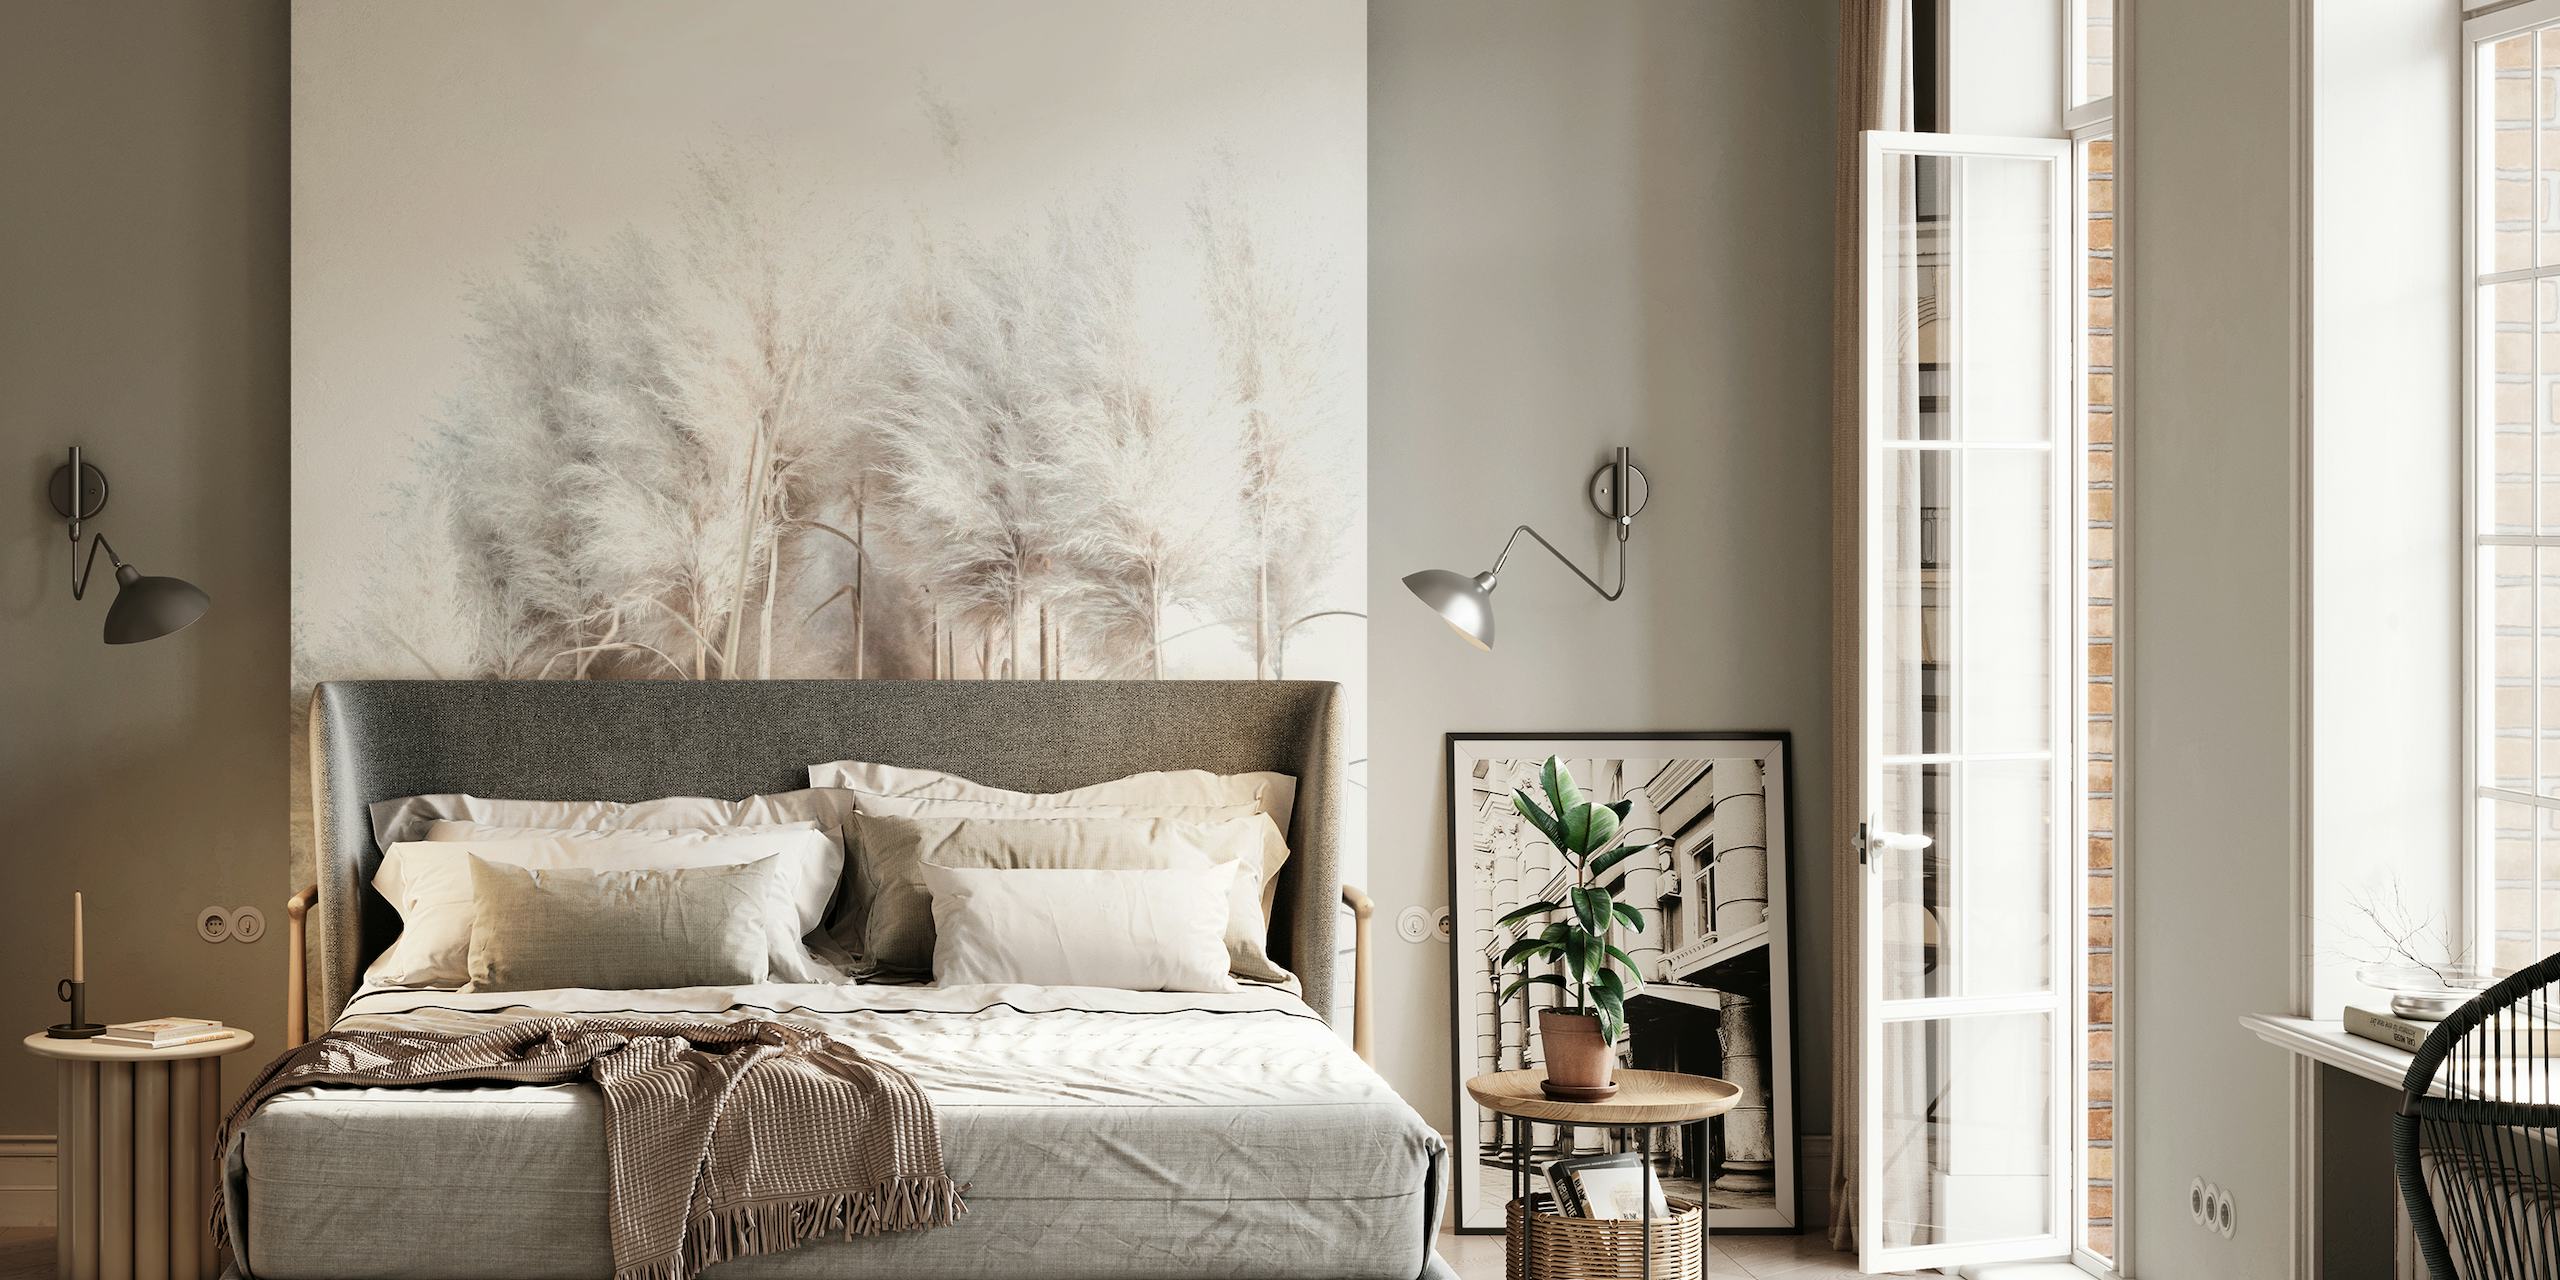 Pampas Grass I wall mural with feathery white plumes on clear background